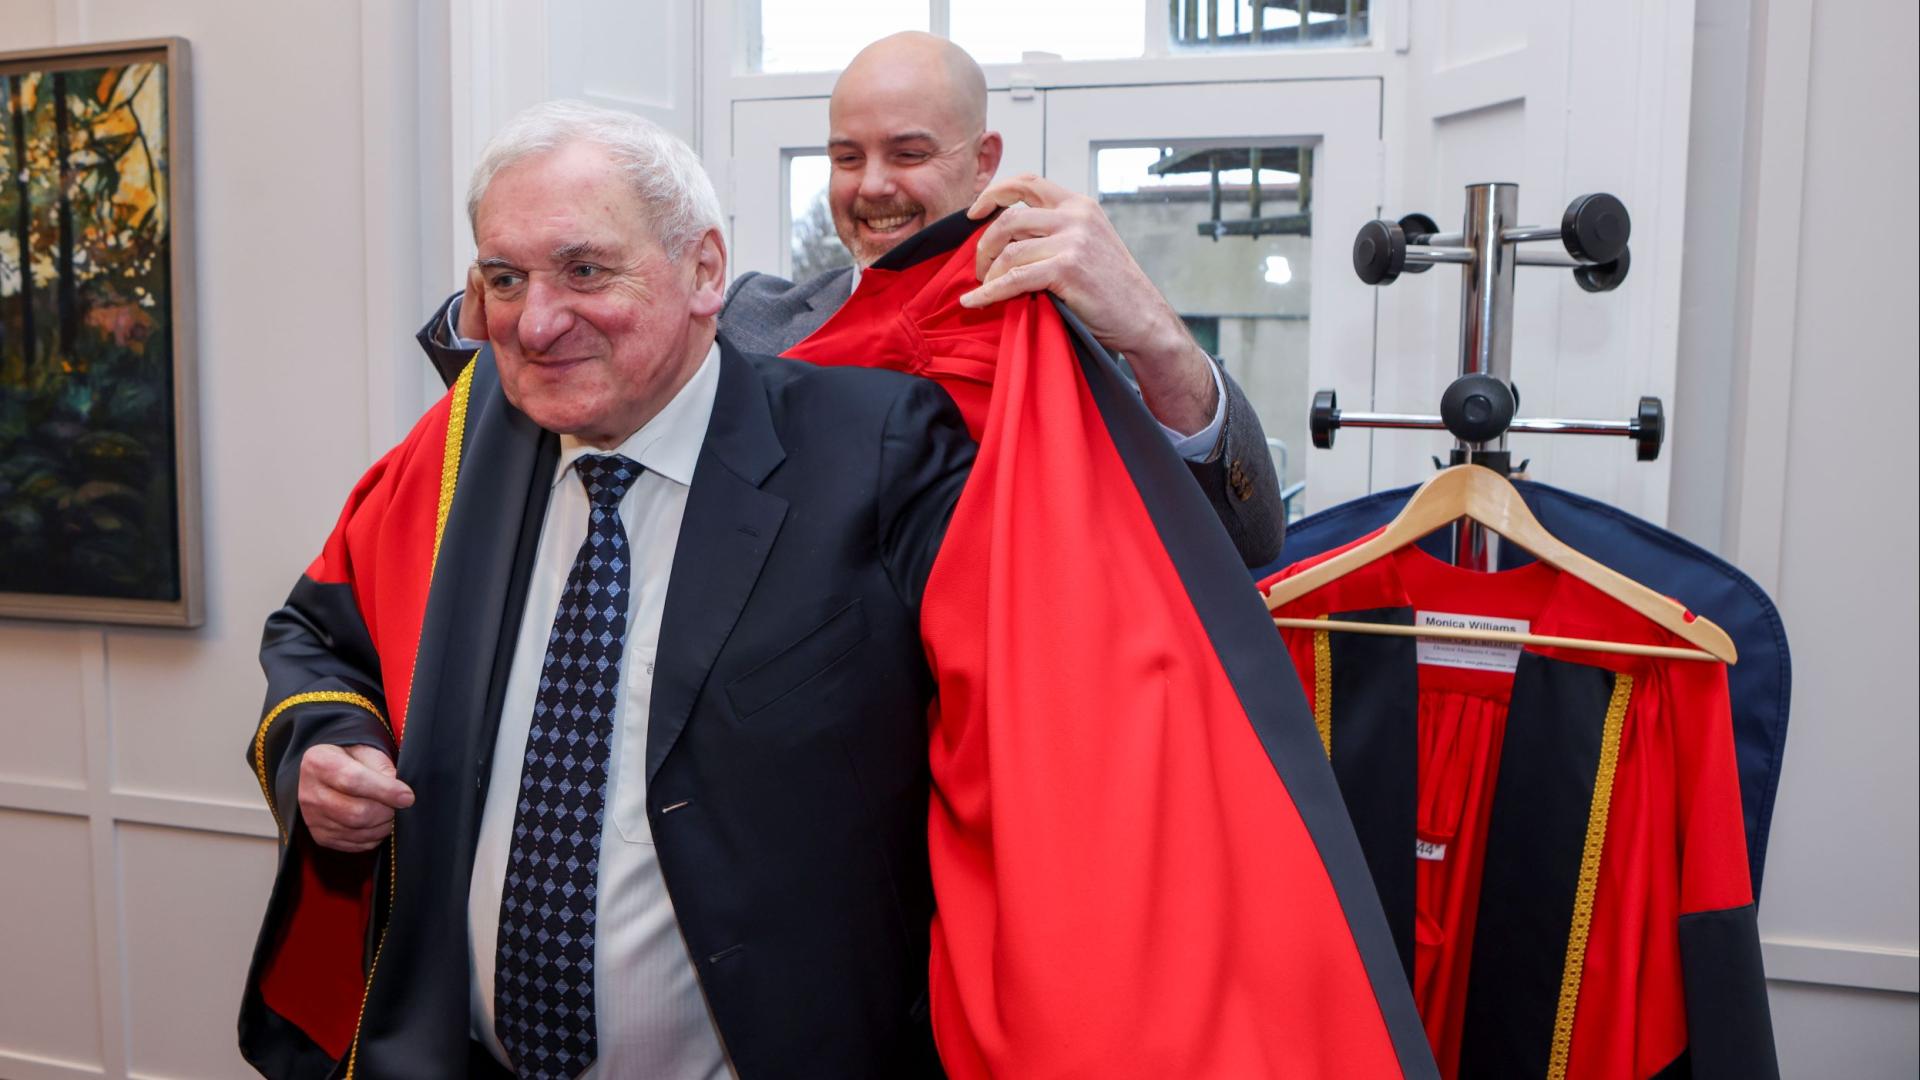 Bertie Ahern donning his robe ahead of his honorary conferring